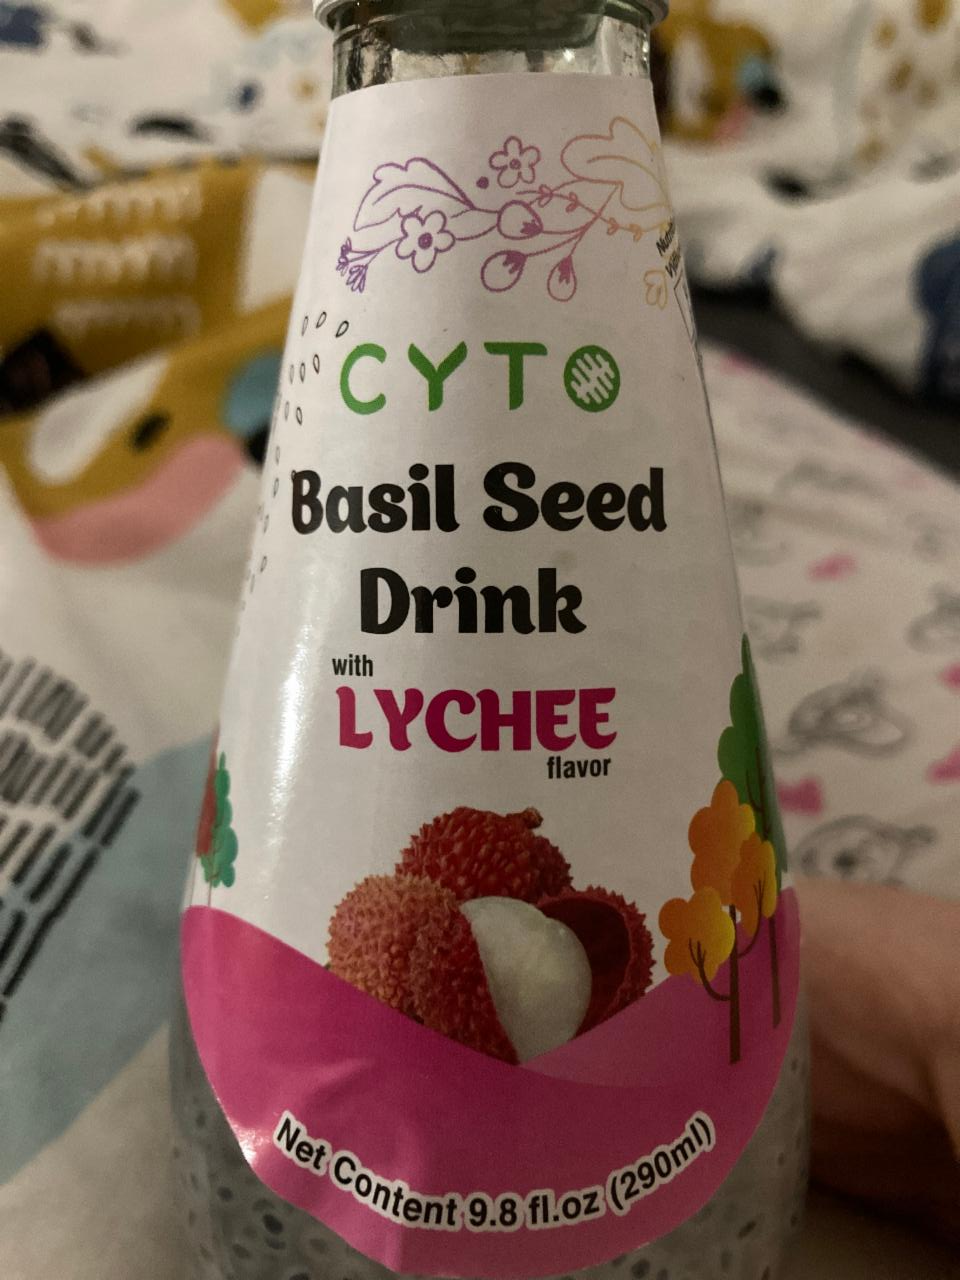 Fotografie - Basil Seed Drink with Lychee flavor Cyto